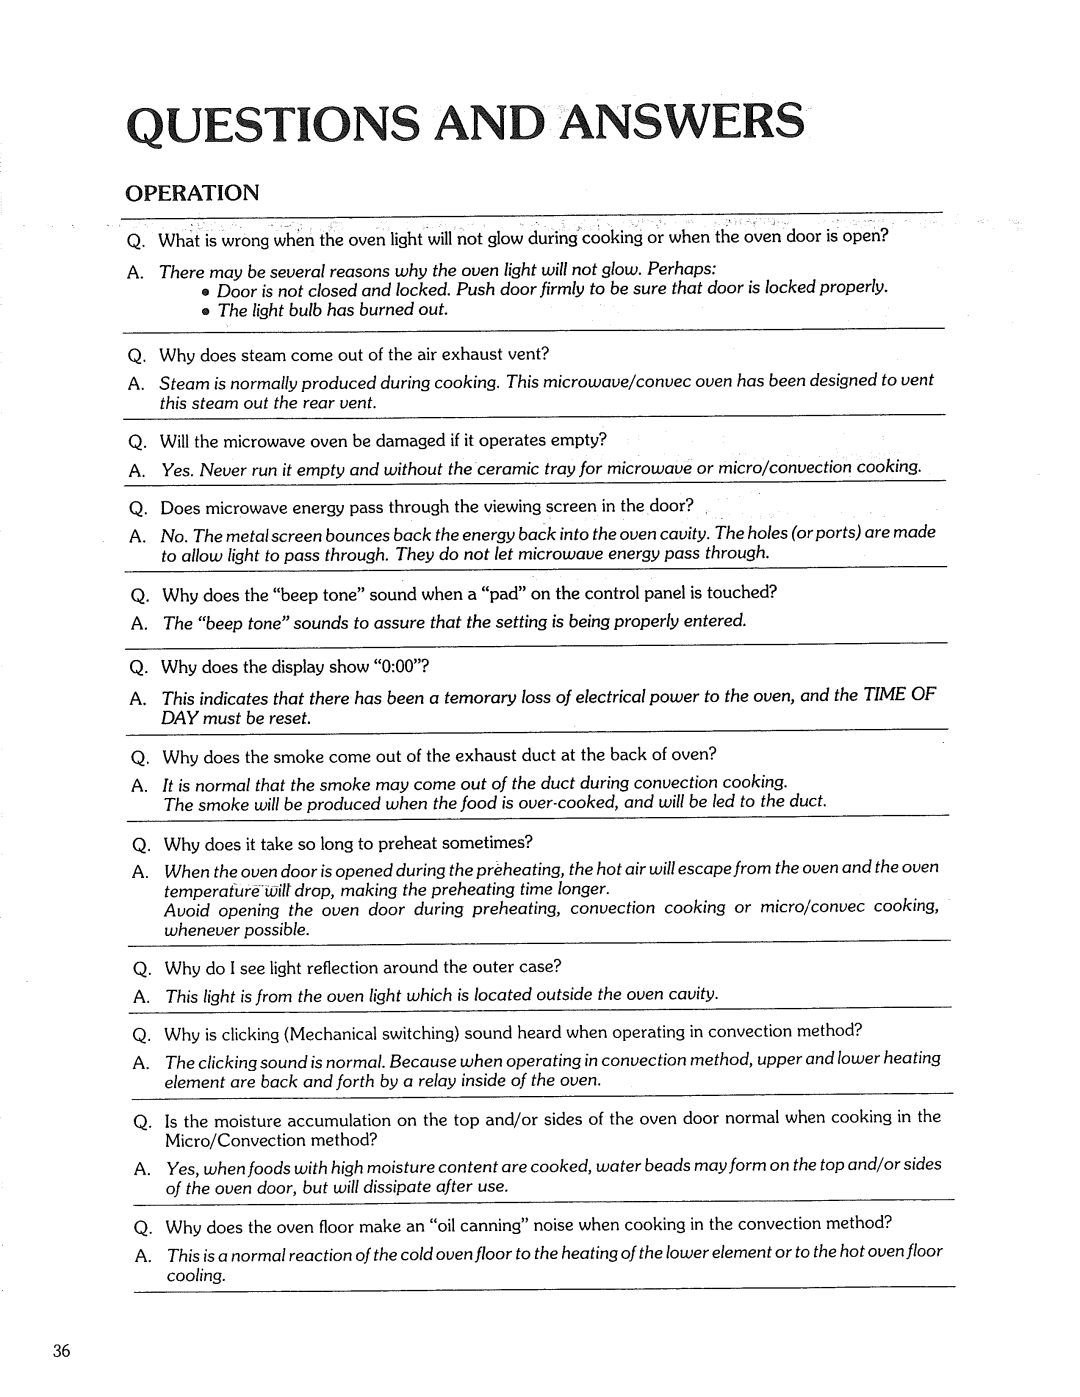 Kenmore 87561 manual Questions And Answers, Operation 